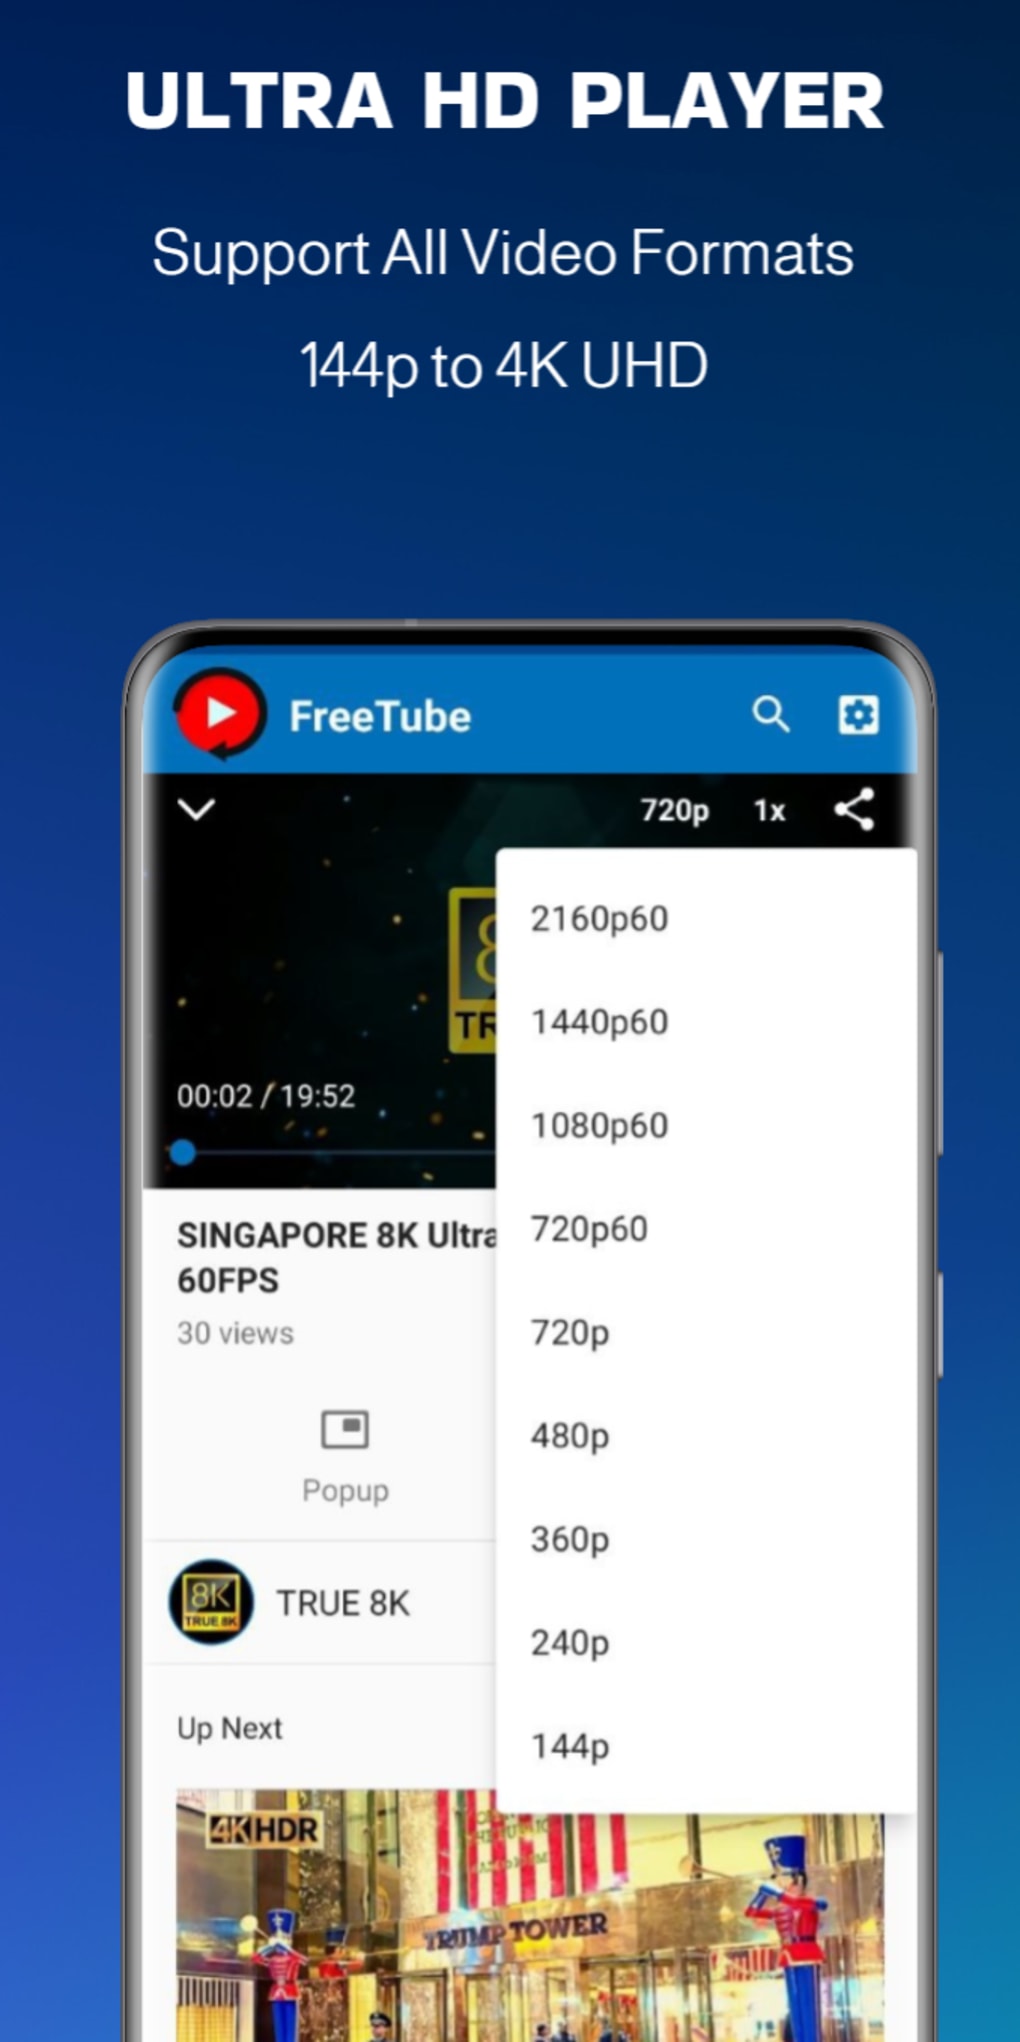 download the new version FreeTube 0.19.1